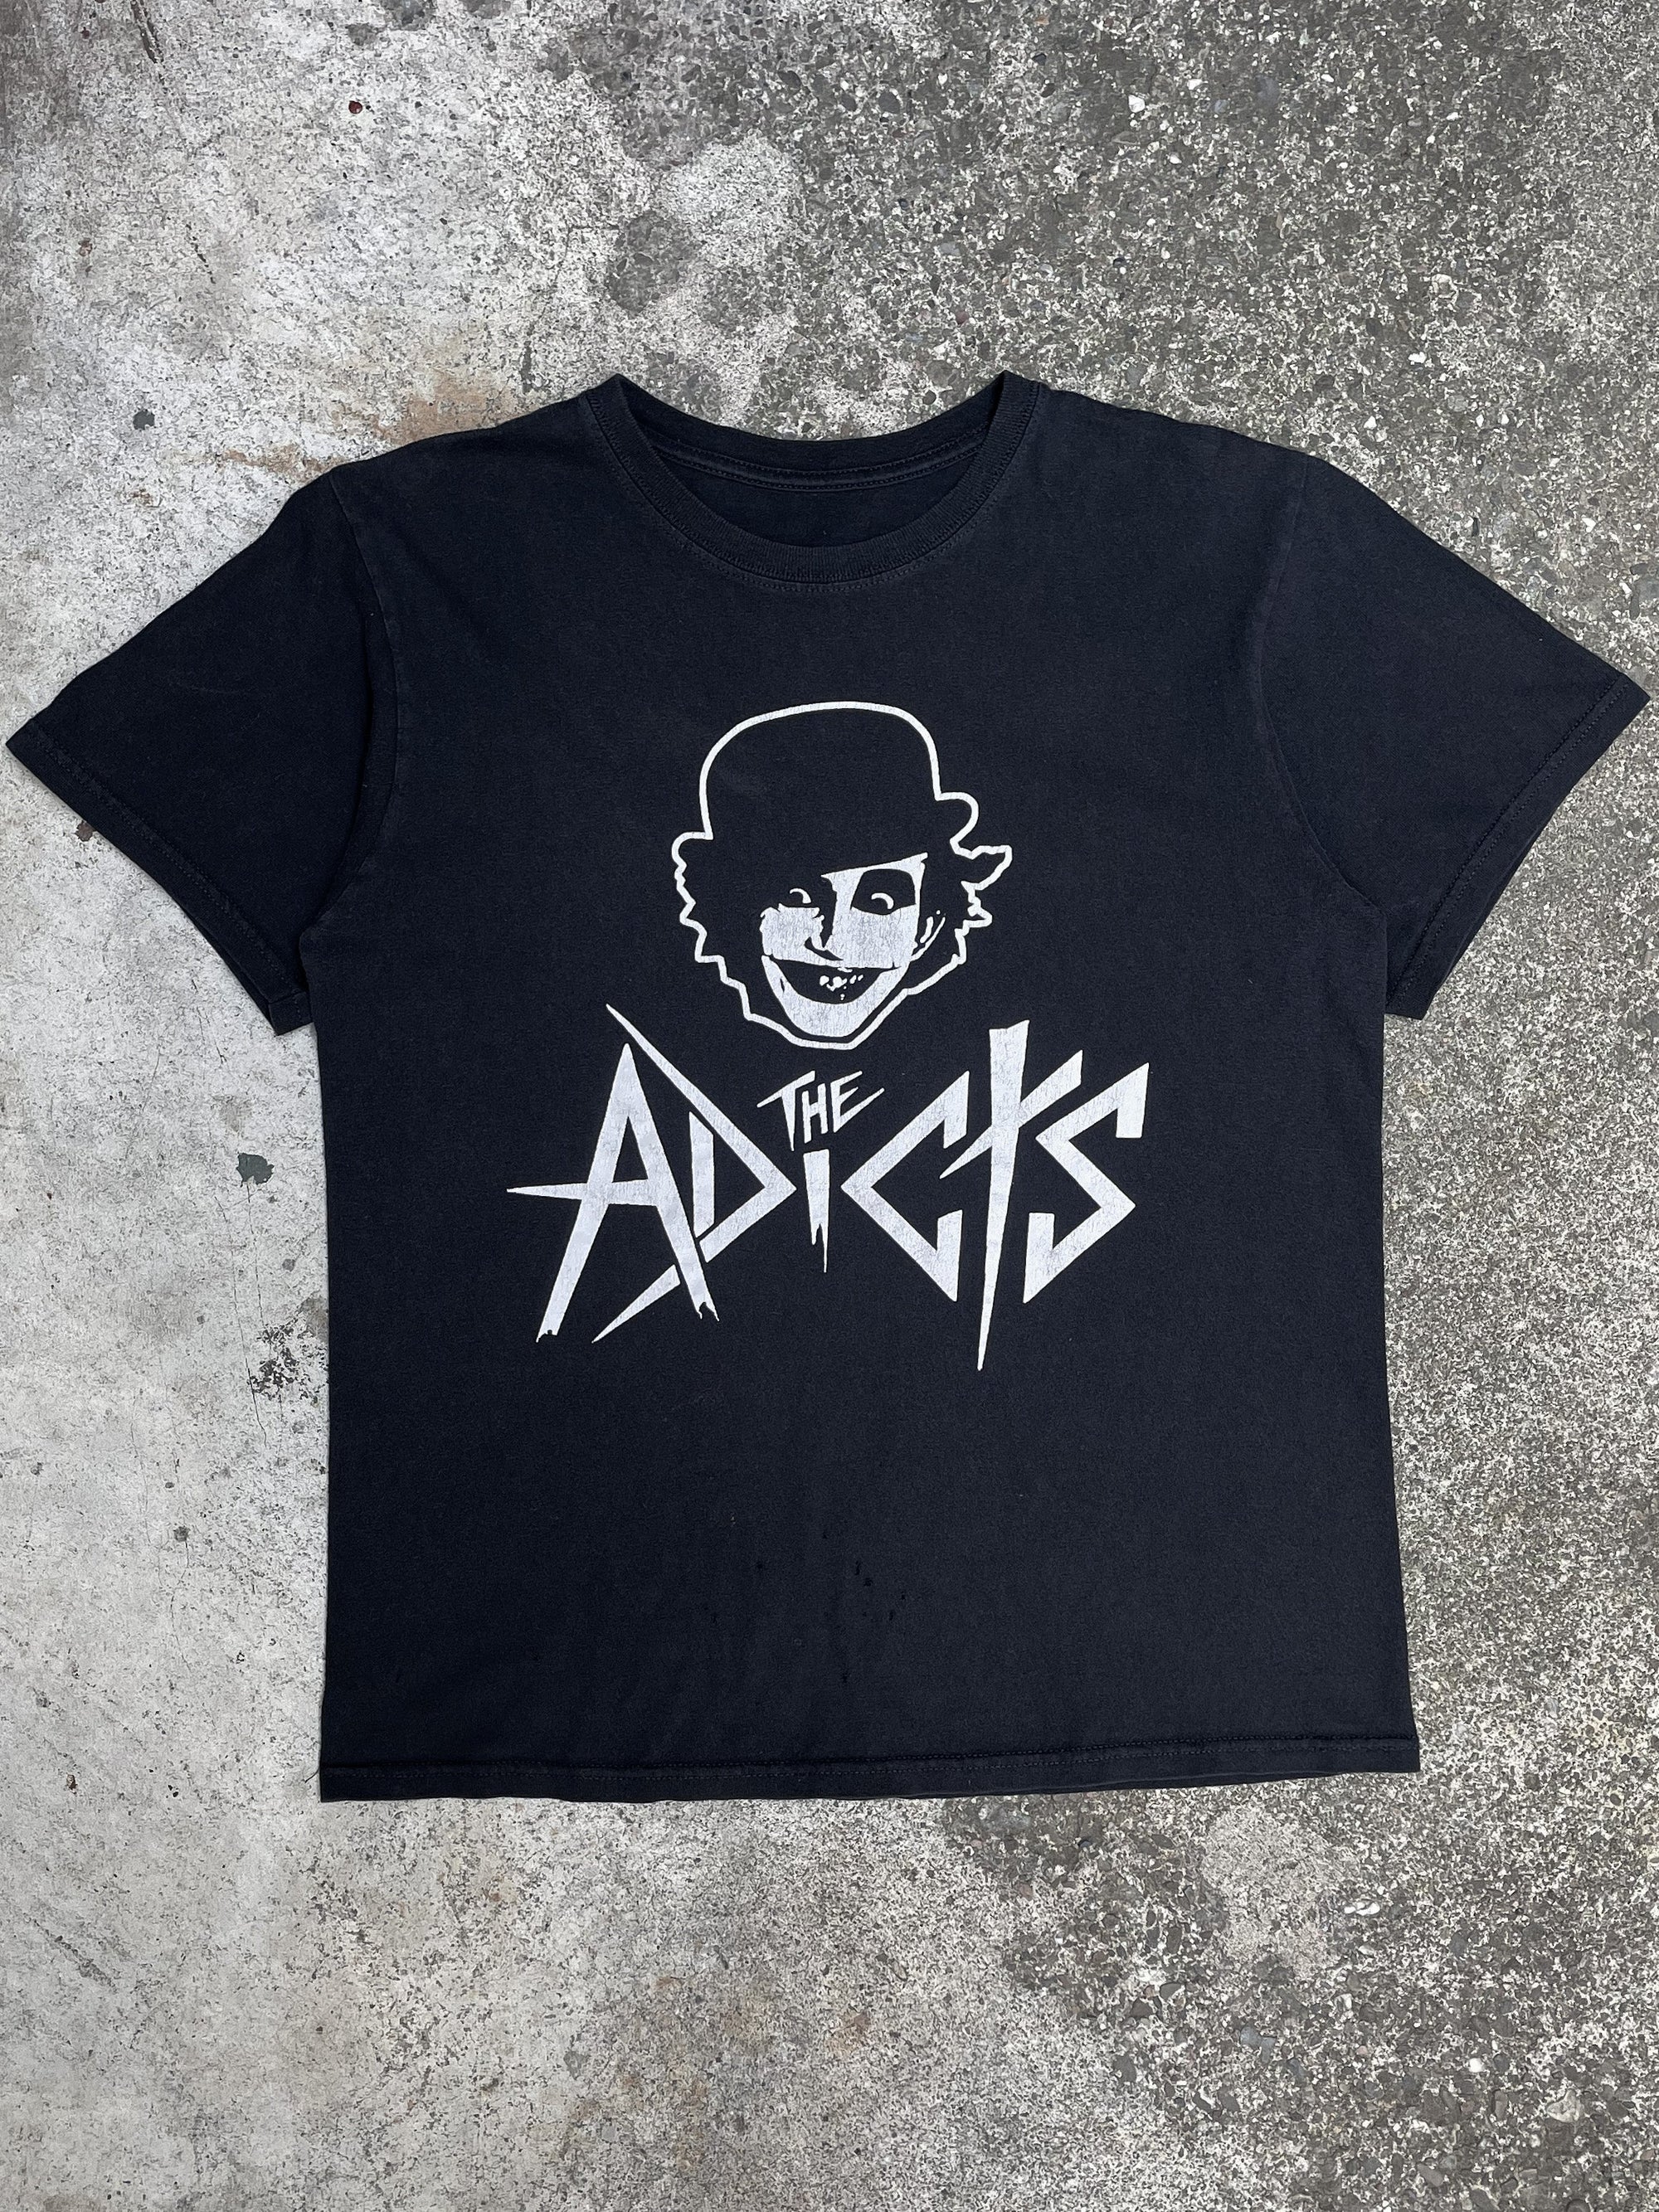 2000s “The Adicts” Band Tee (M)